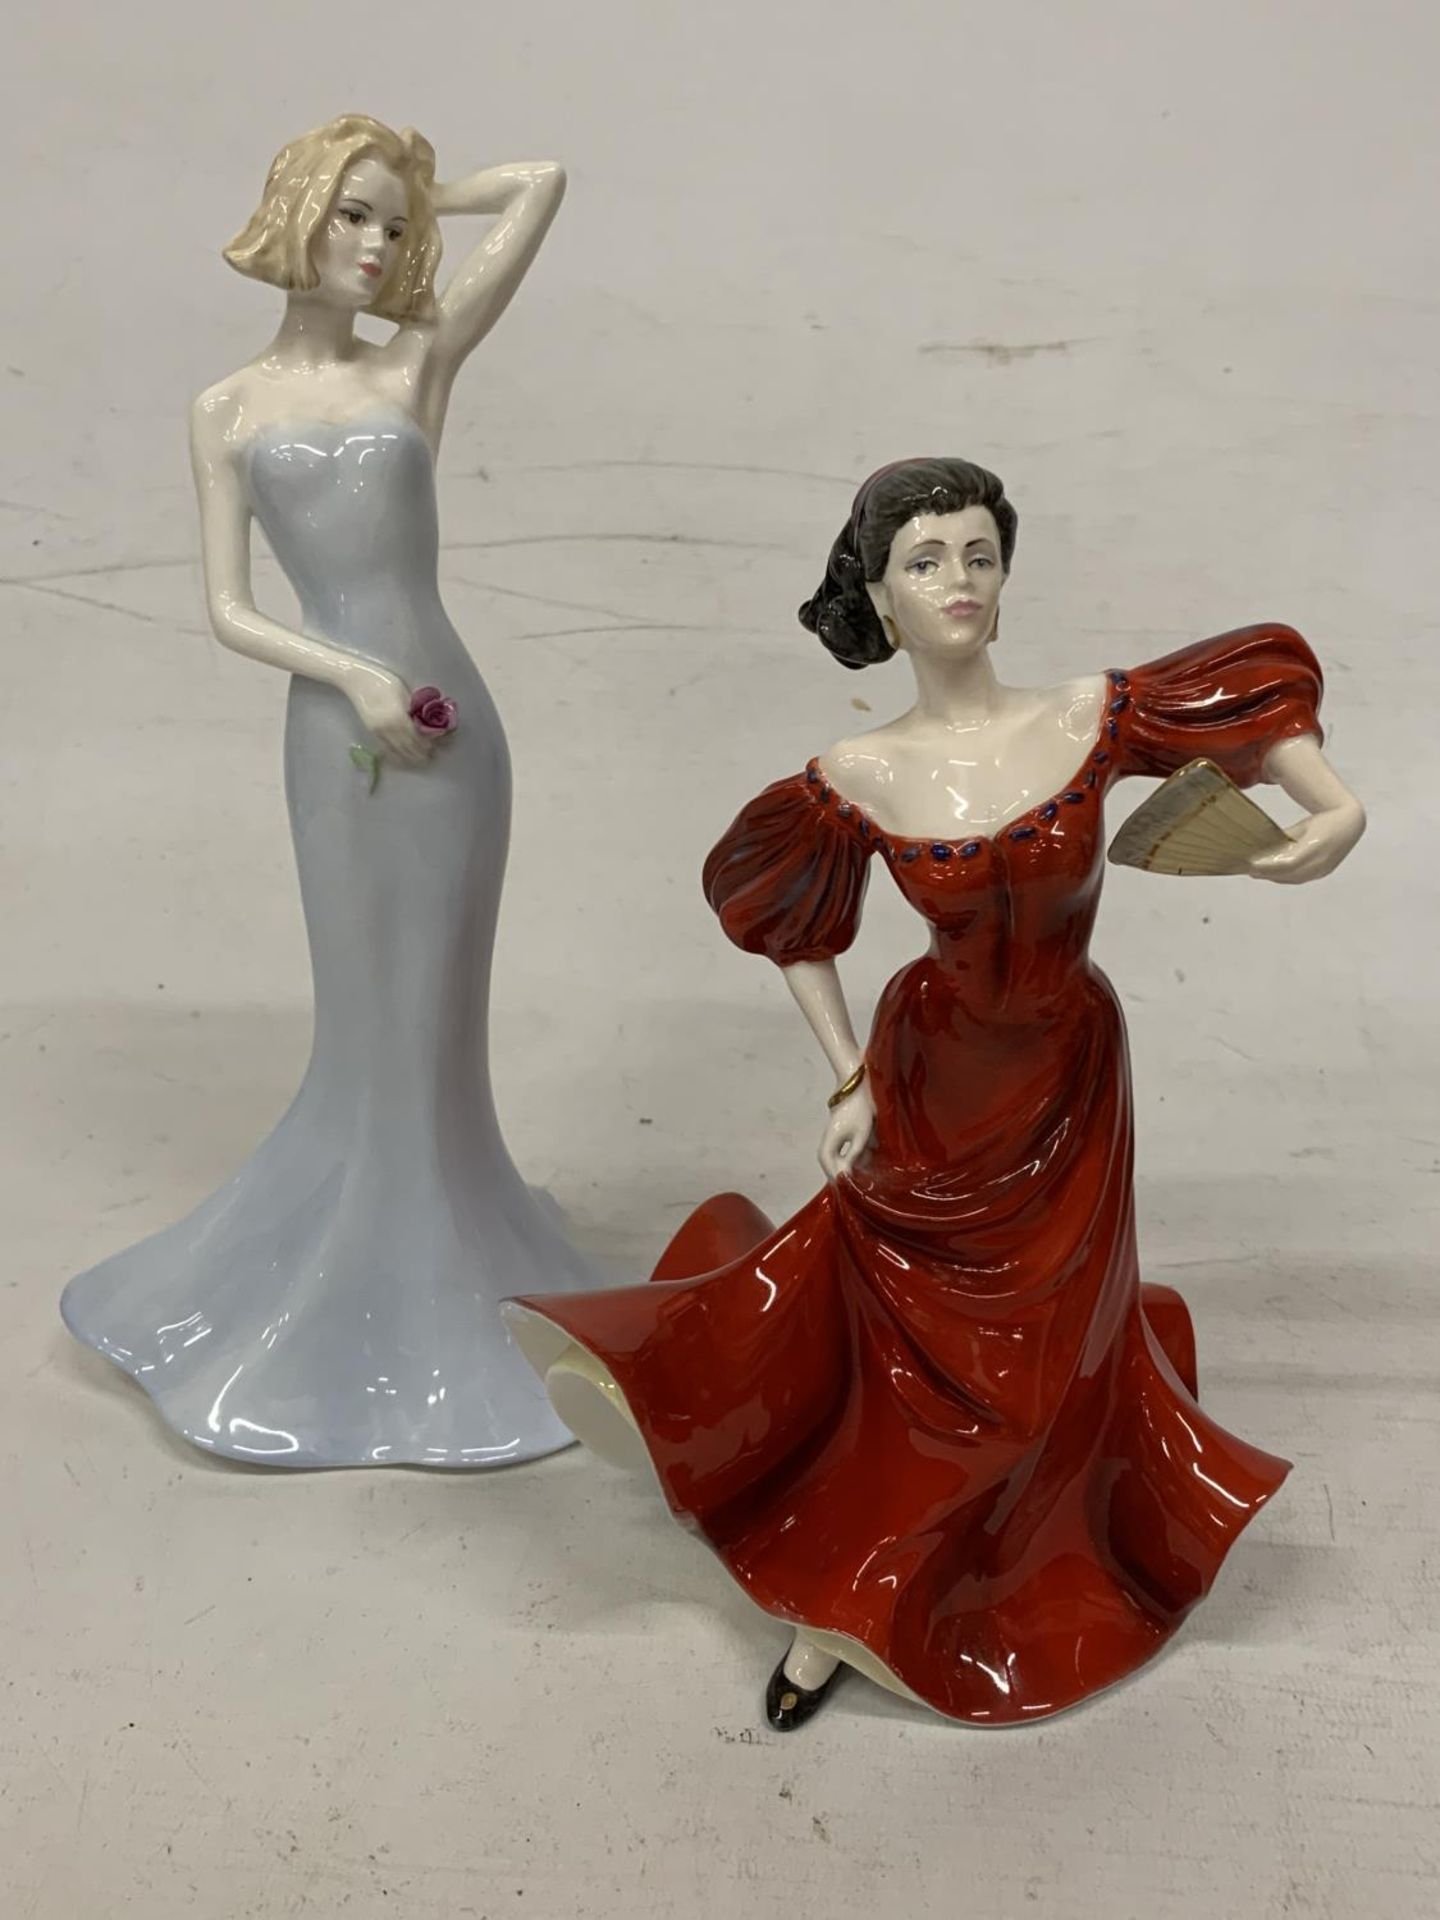 TWO COALPORT FIGURINES - SILHOUETTES "GILLIAN" AND LADIES OF FASHION "ROMANY DANCE"